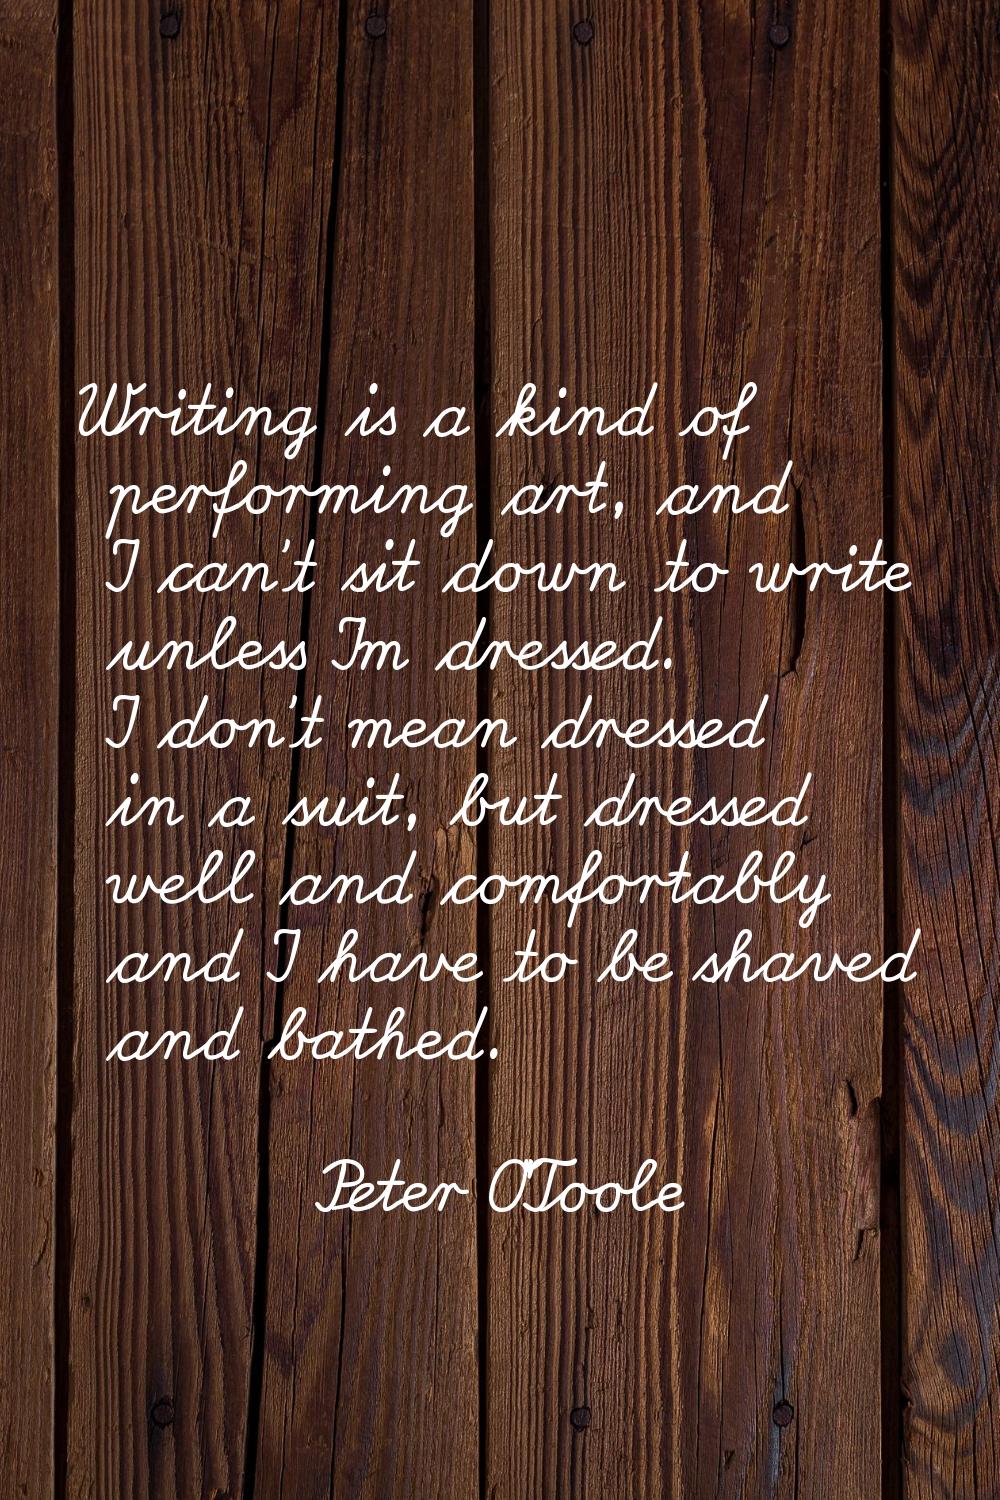 Writing is a kind of performing art, and I can't sit down to write unless I'm dressed. I don't mean